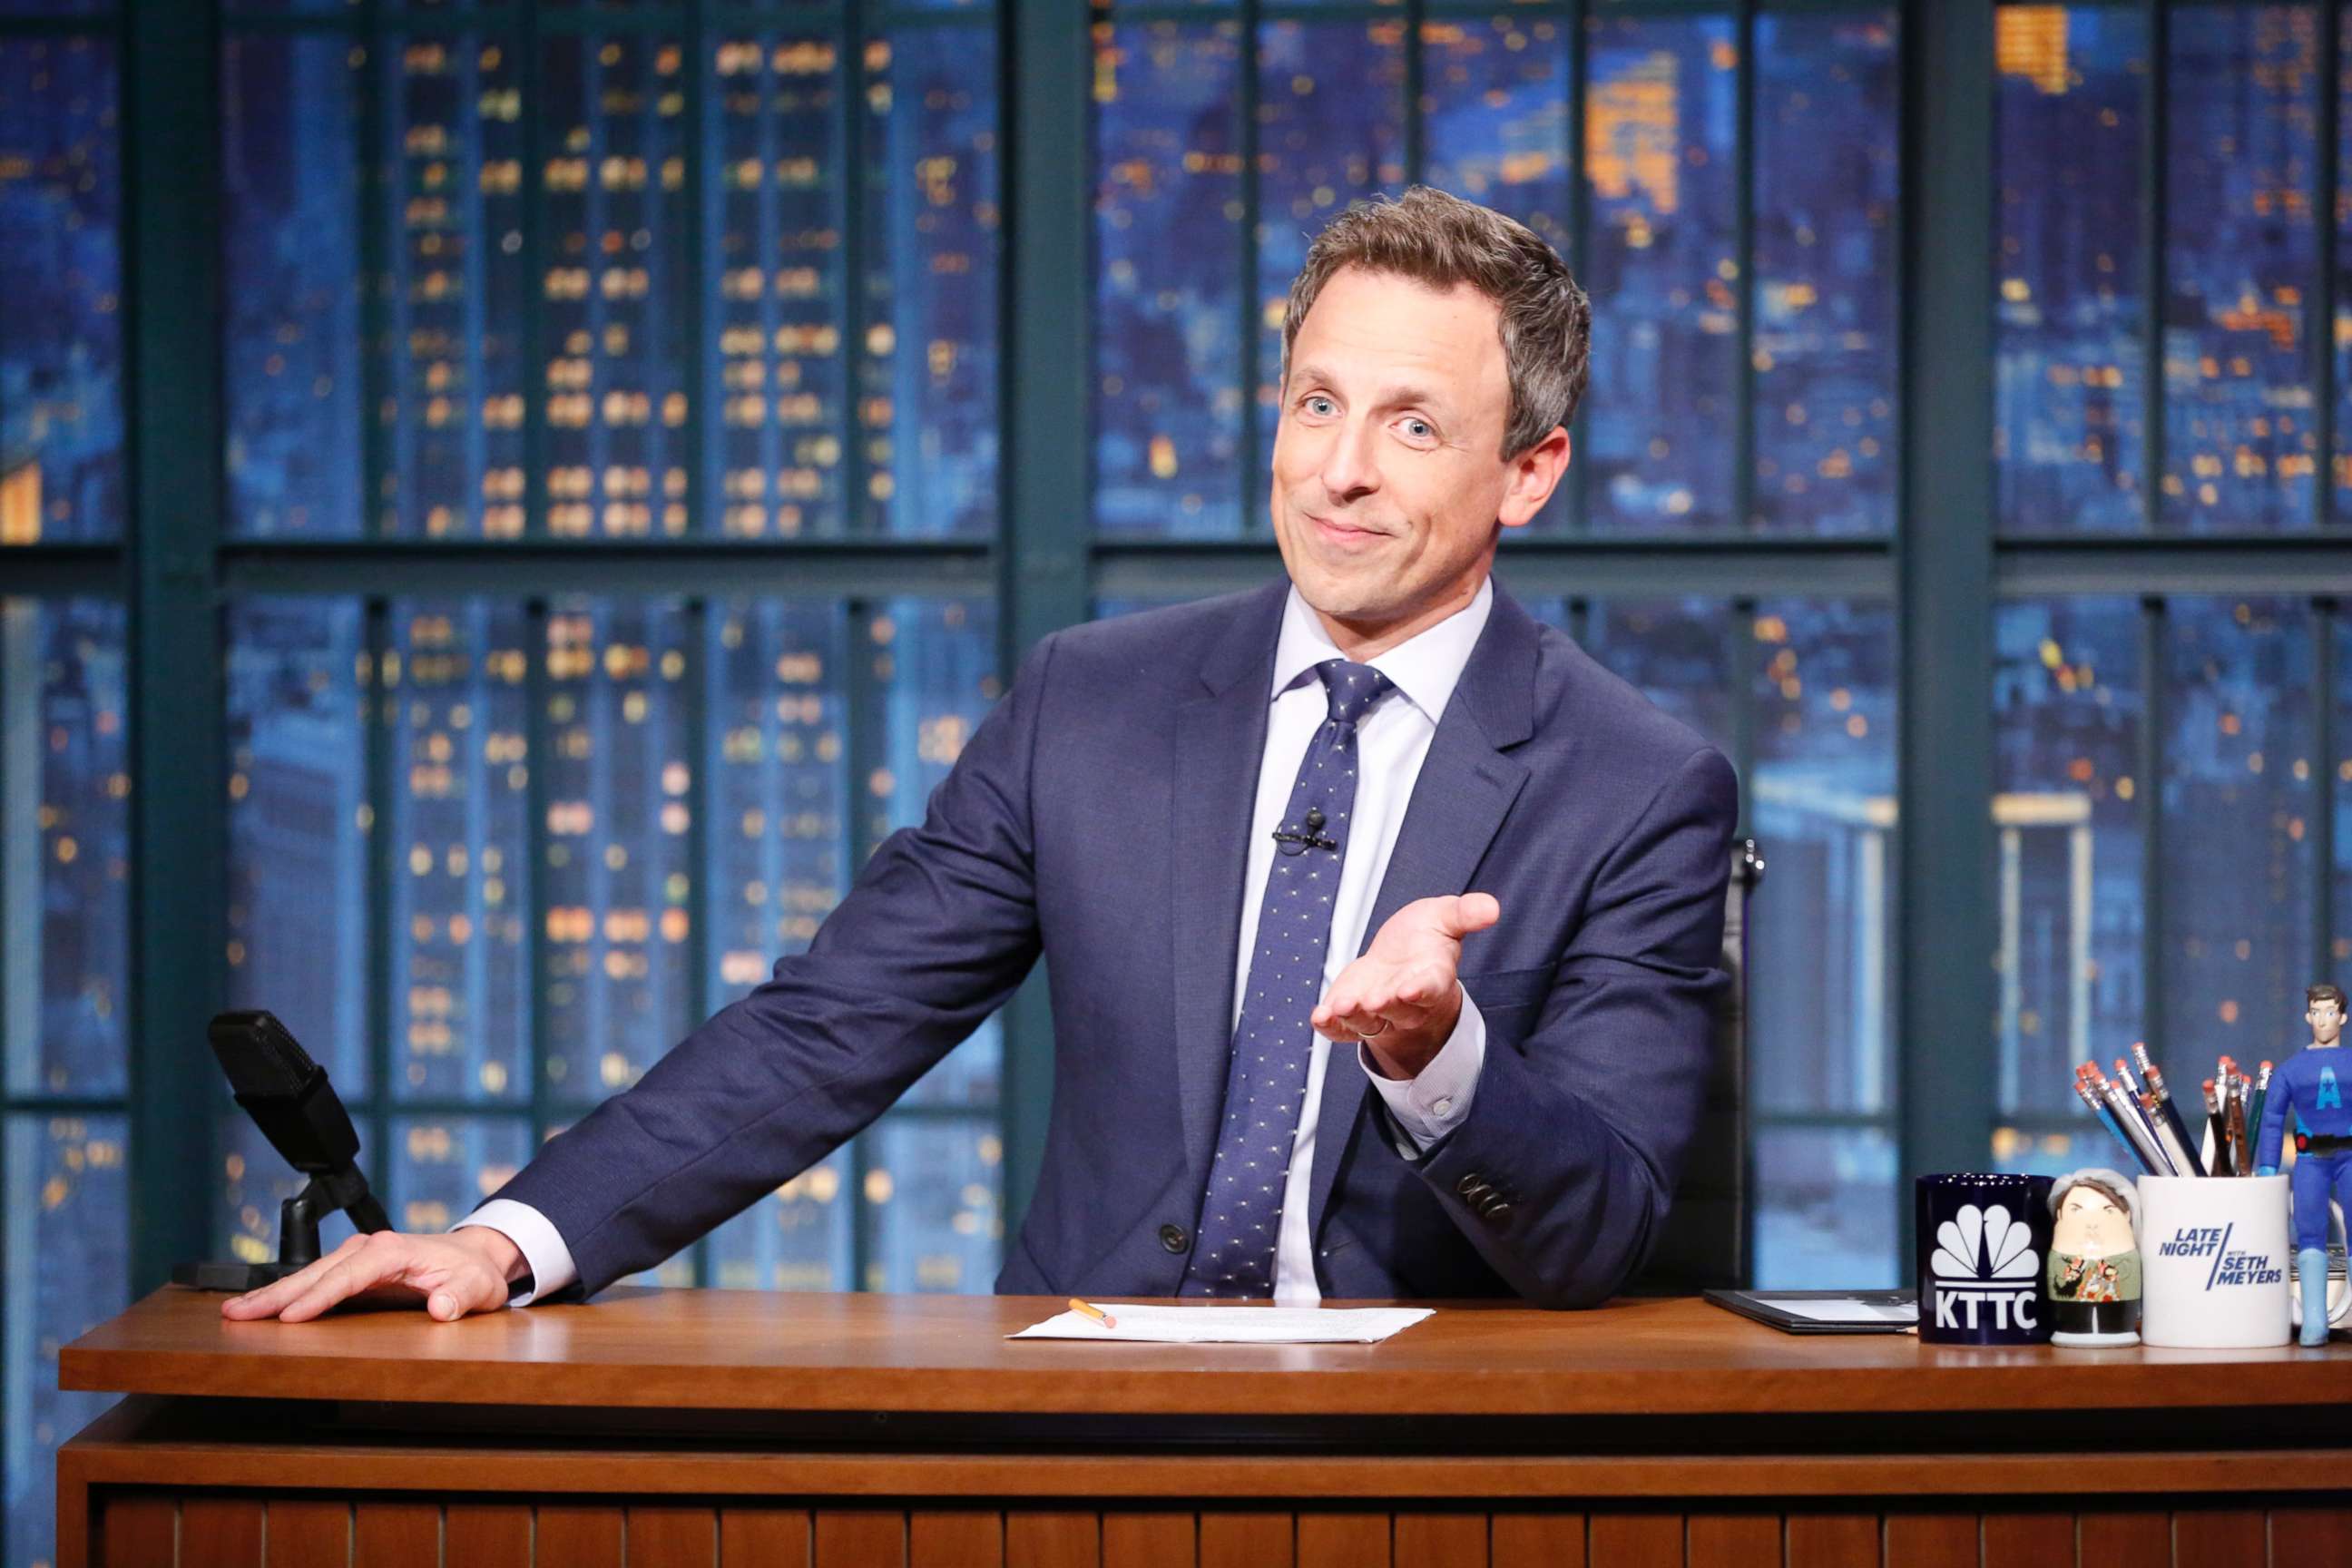 PHOTO: Host Seth Meyers during the monologue, Oct. 31, 2017.